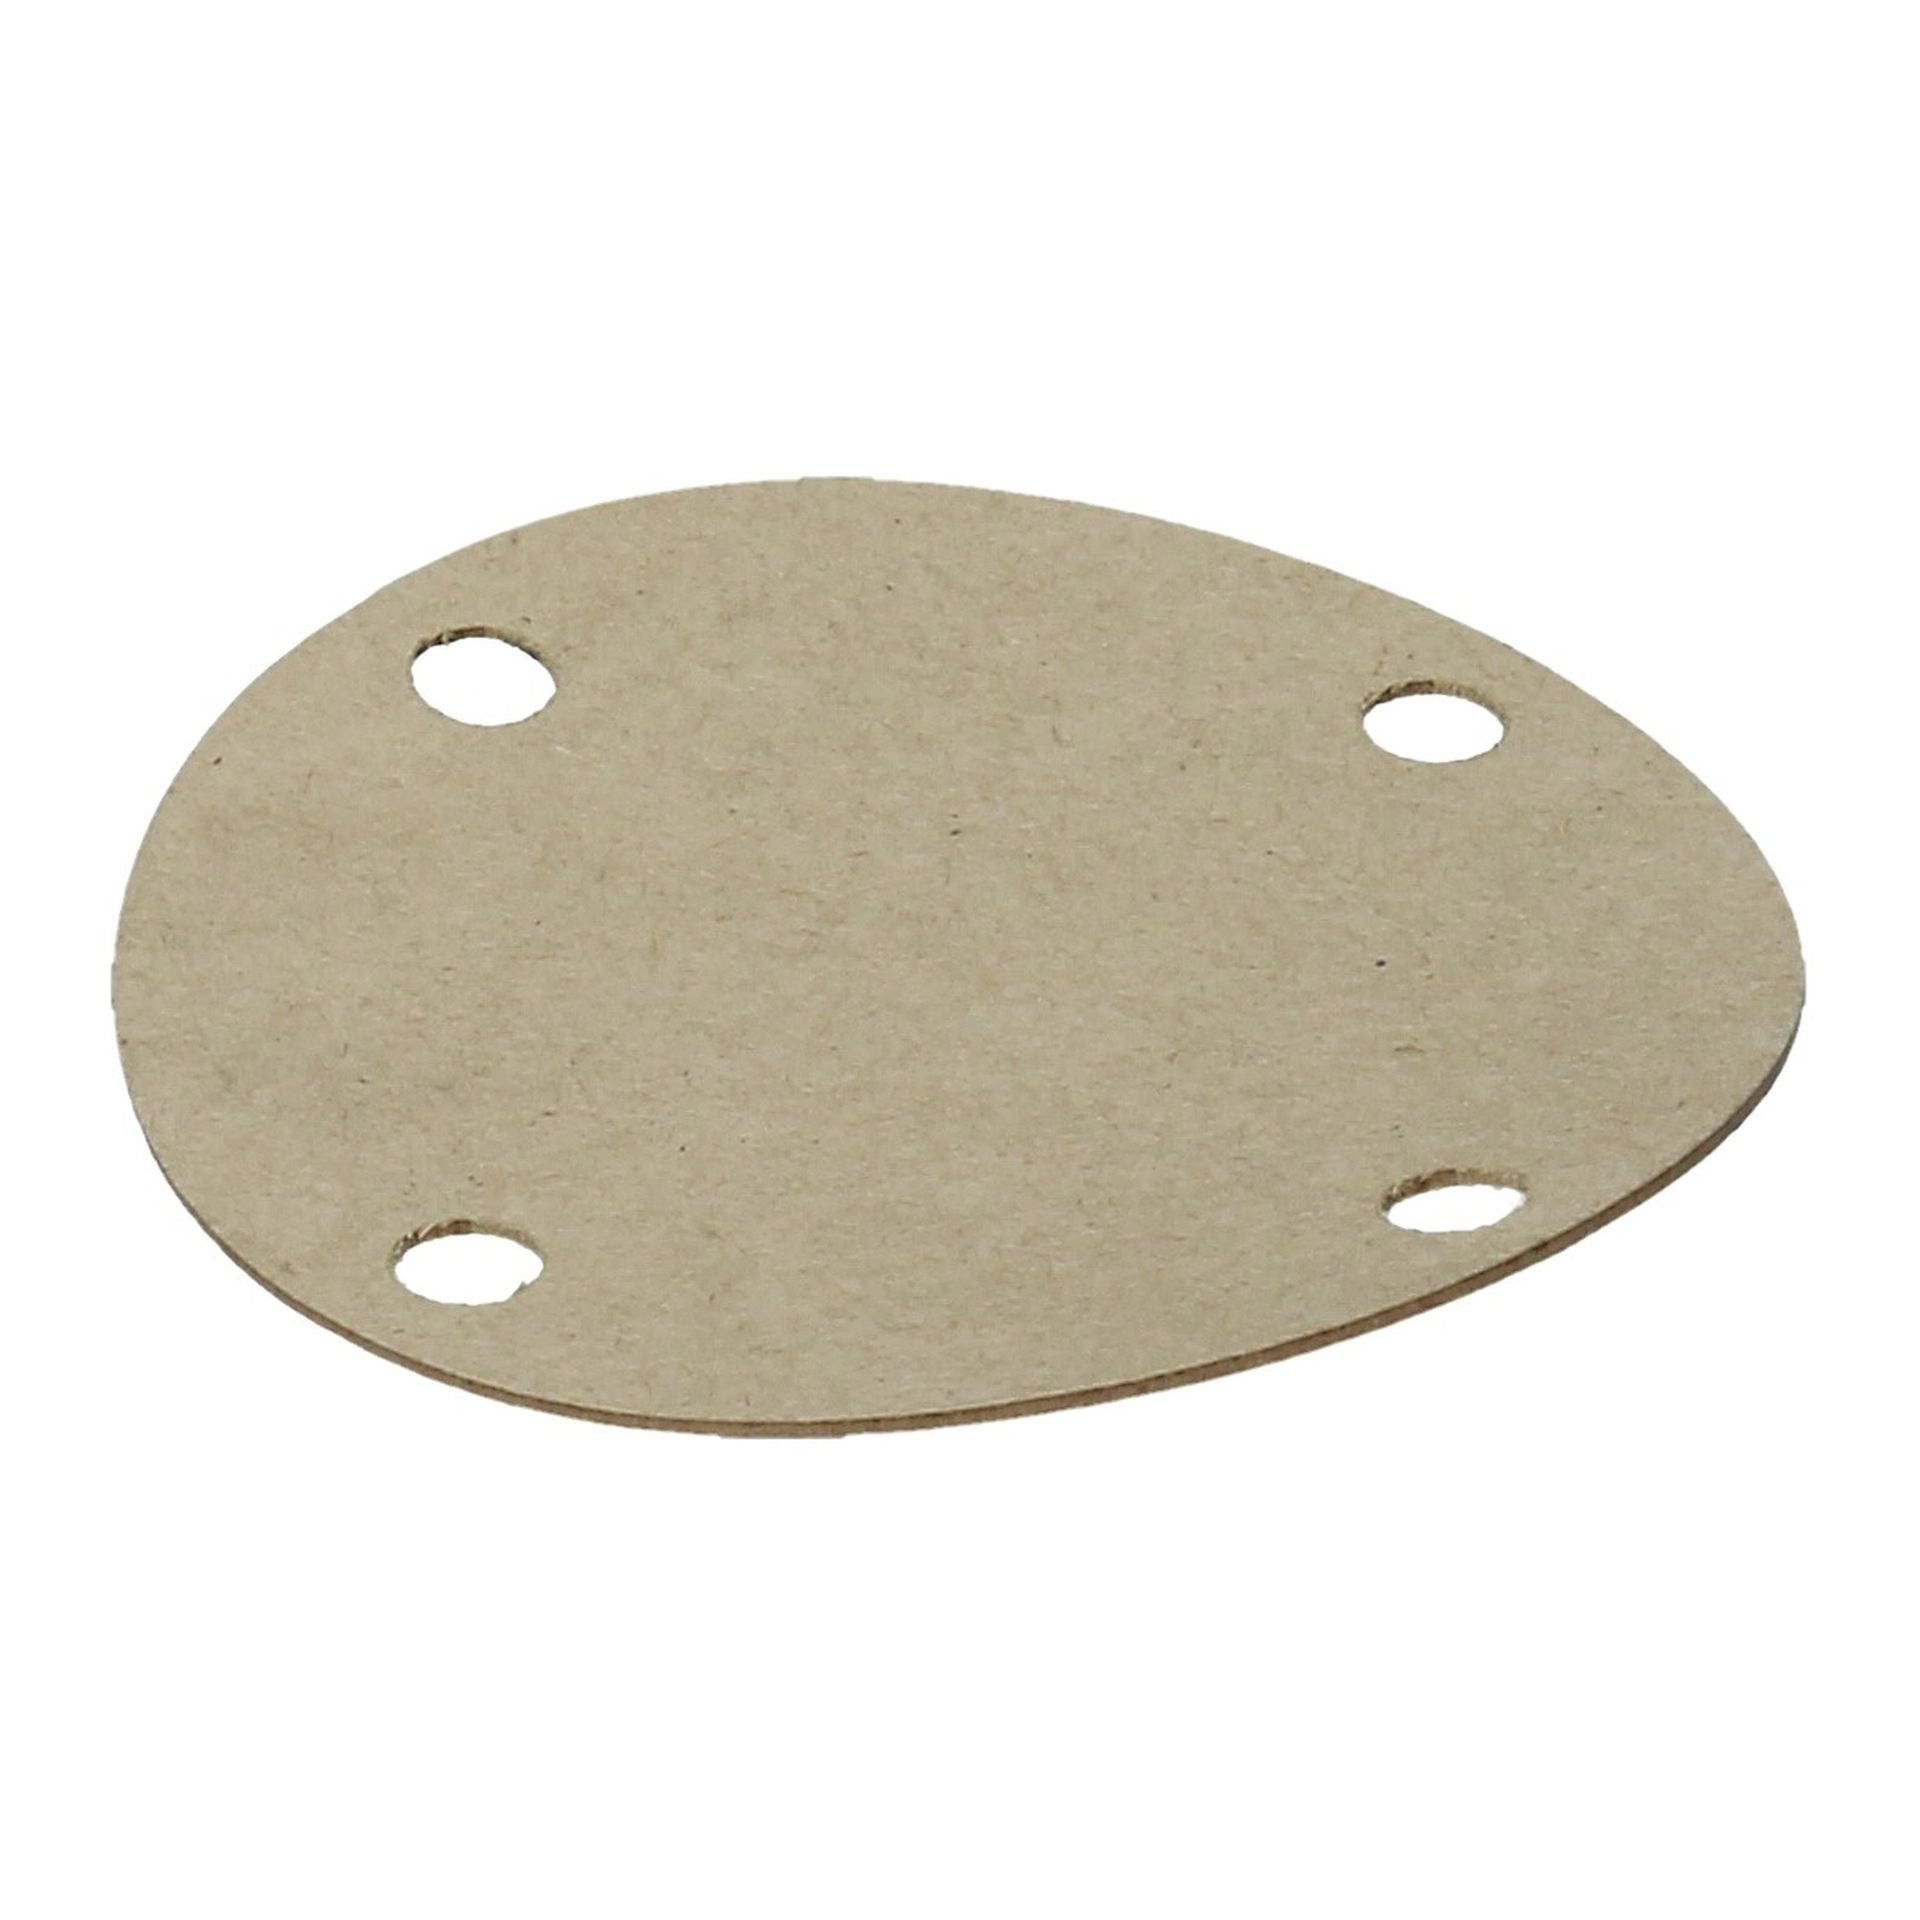 Auxiliary Back Bearing Cover Gasket 250/275